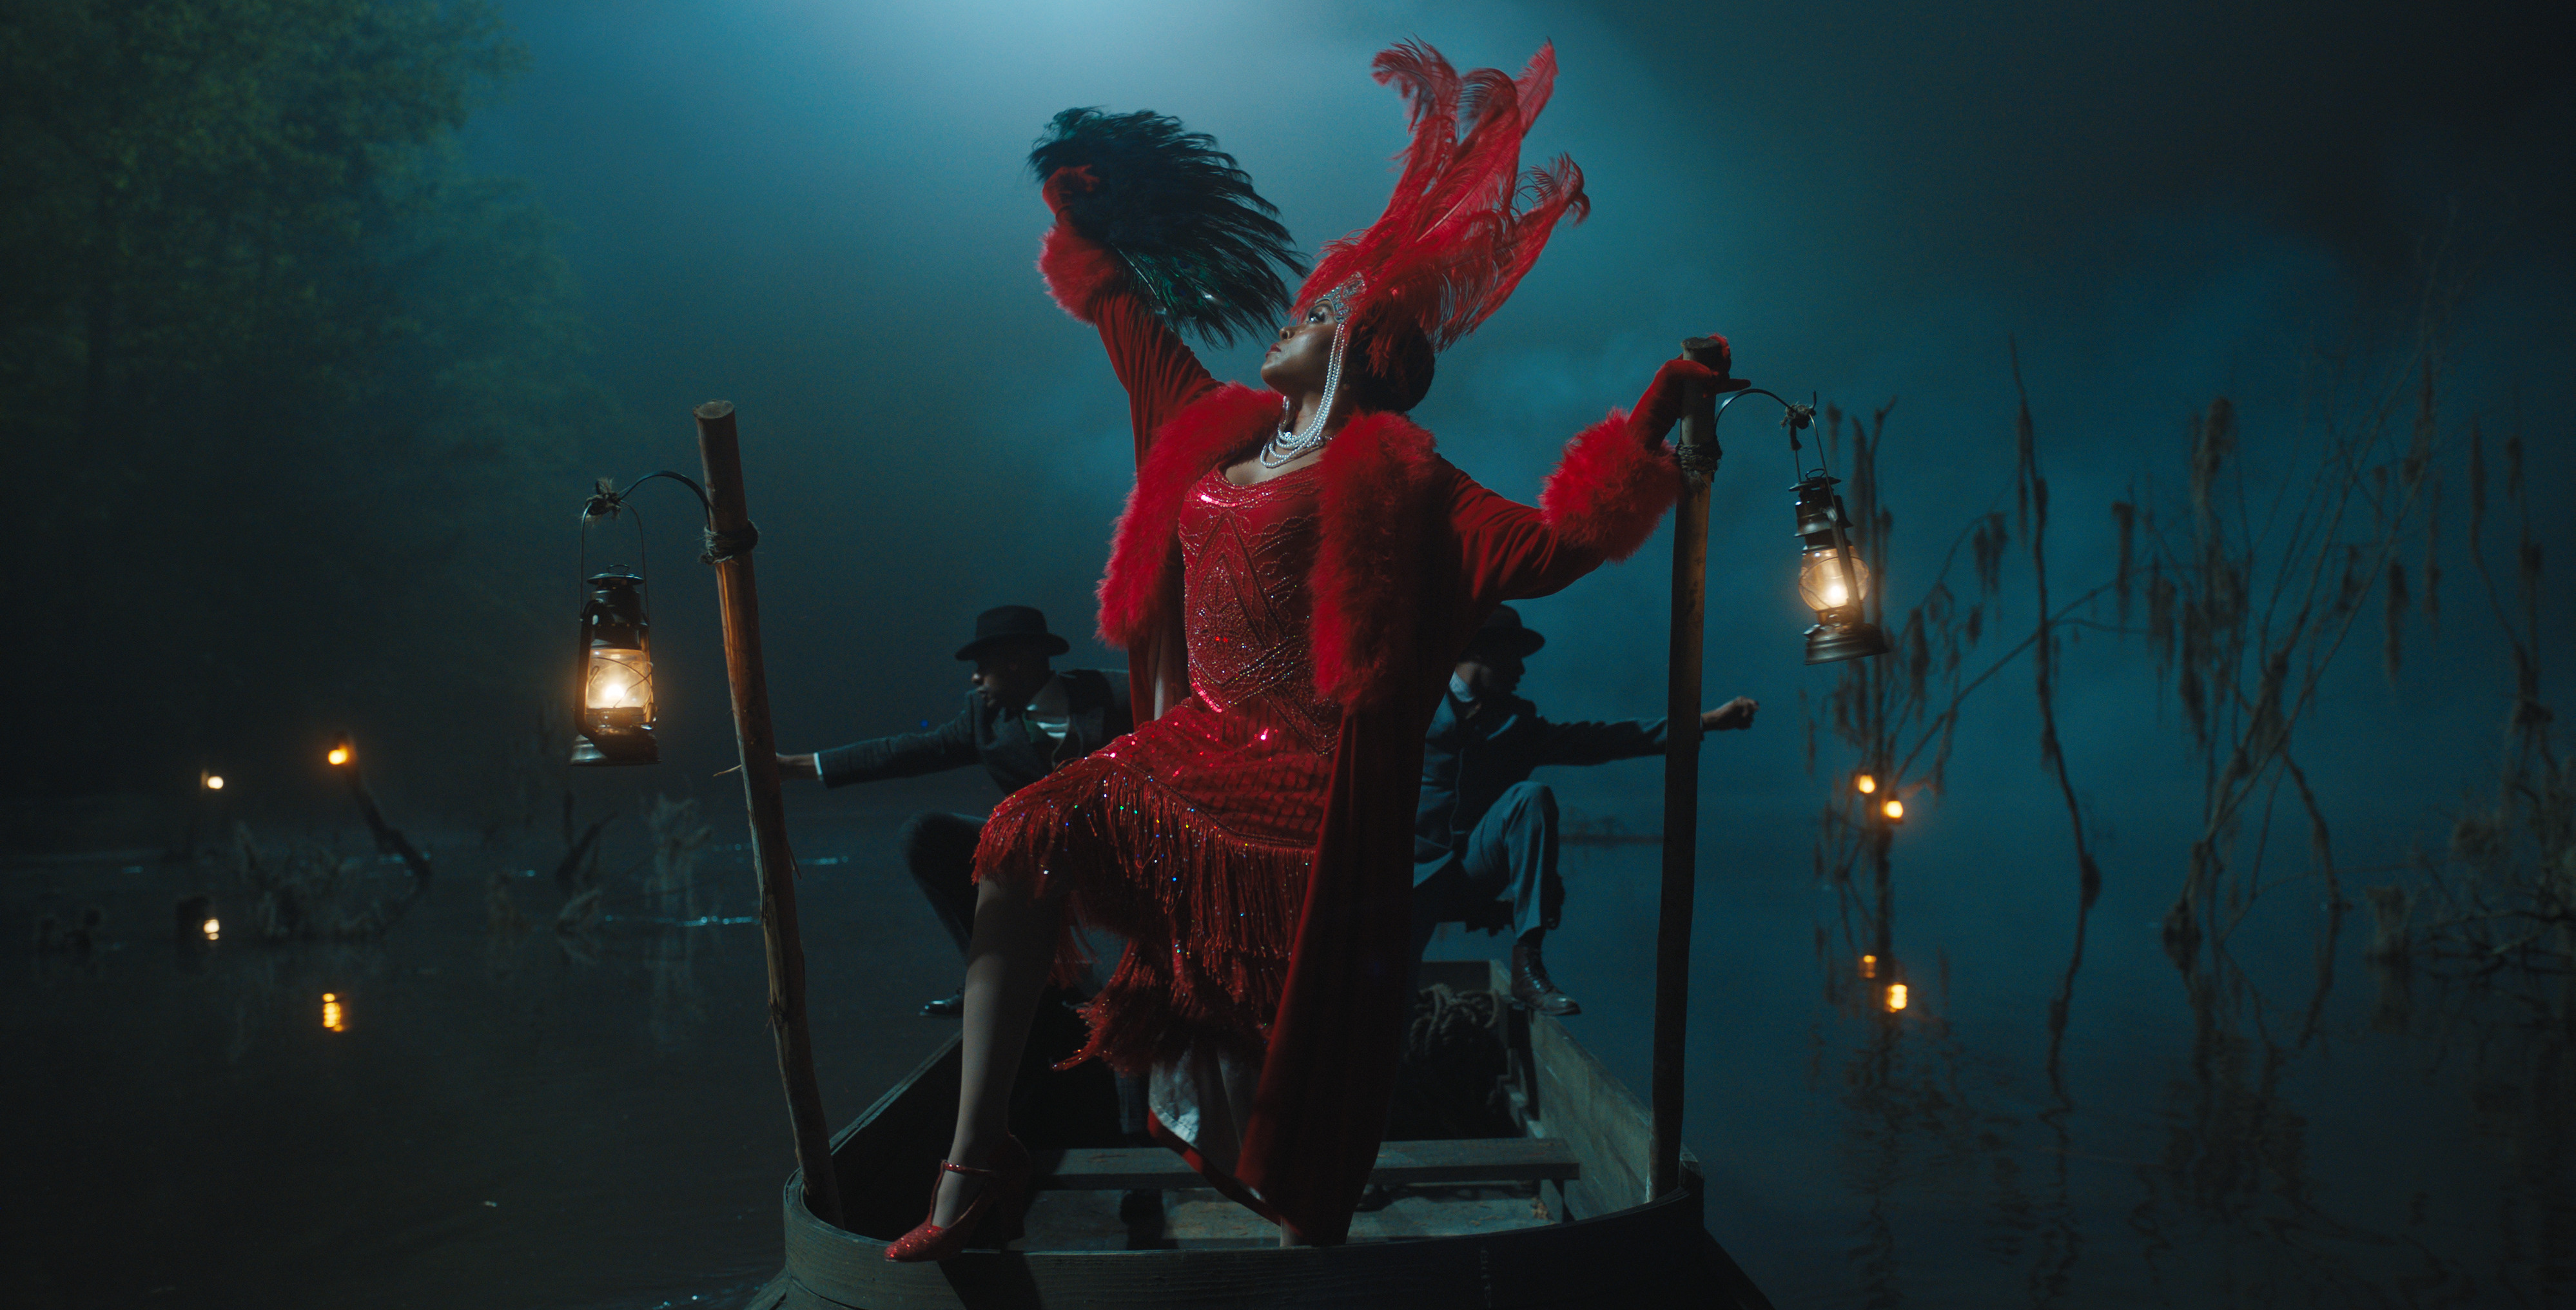 Shug Avery (Taraji P. Henson) arrives at a juke joint in style, riding a skiff in a red sequined dress and feathered hat and posing dramatically with a feathered fan in the musical version of The Color Purple